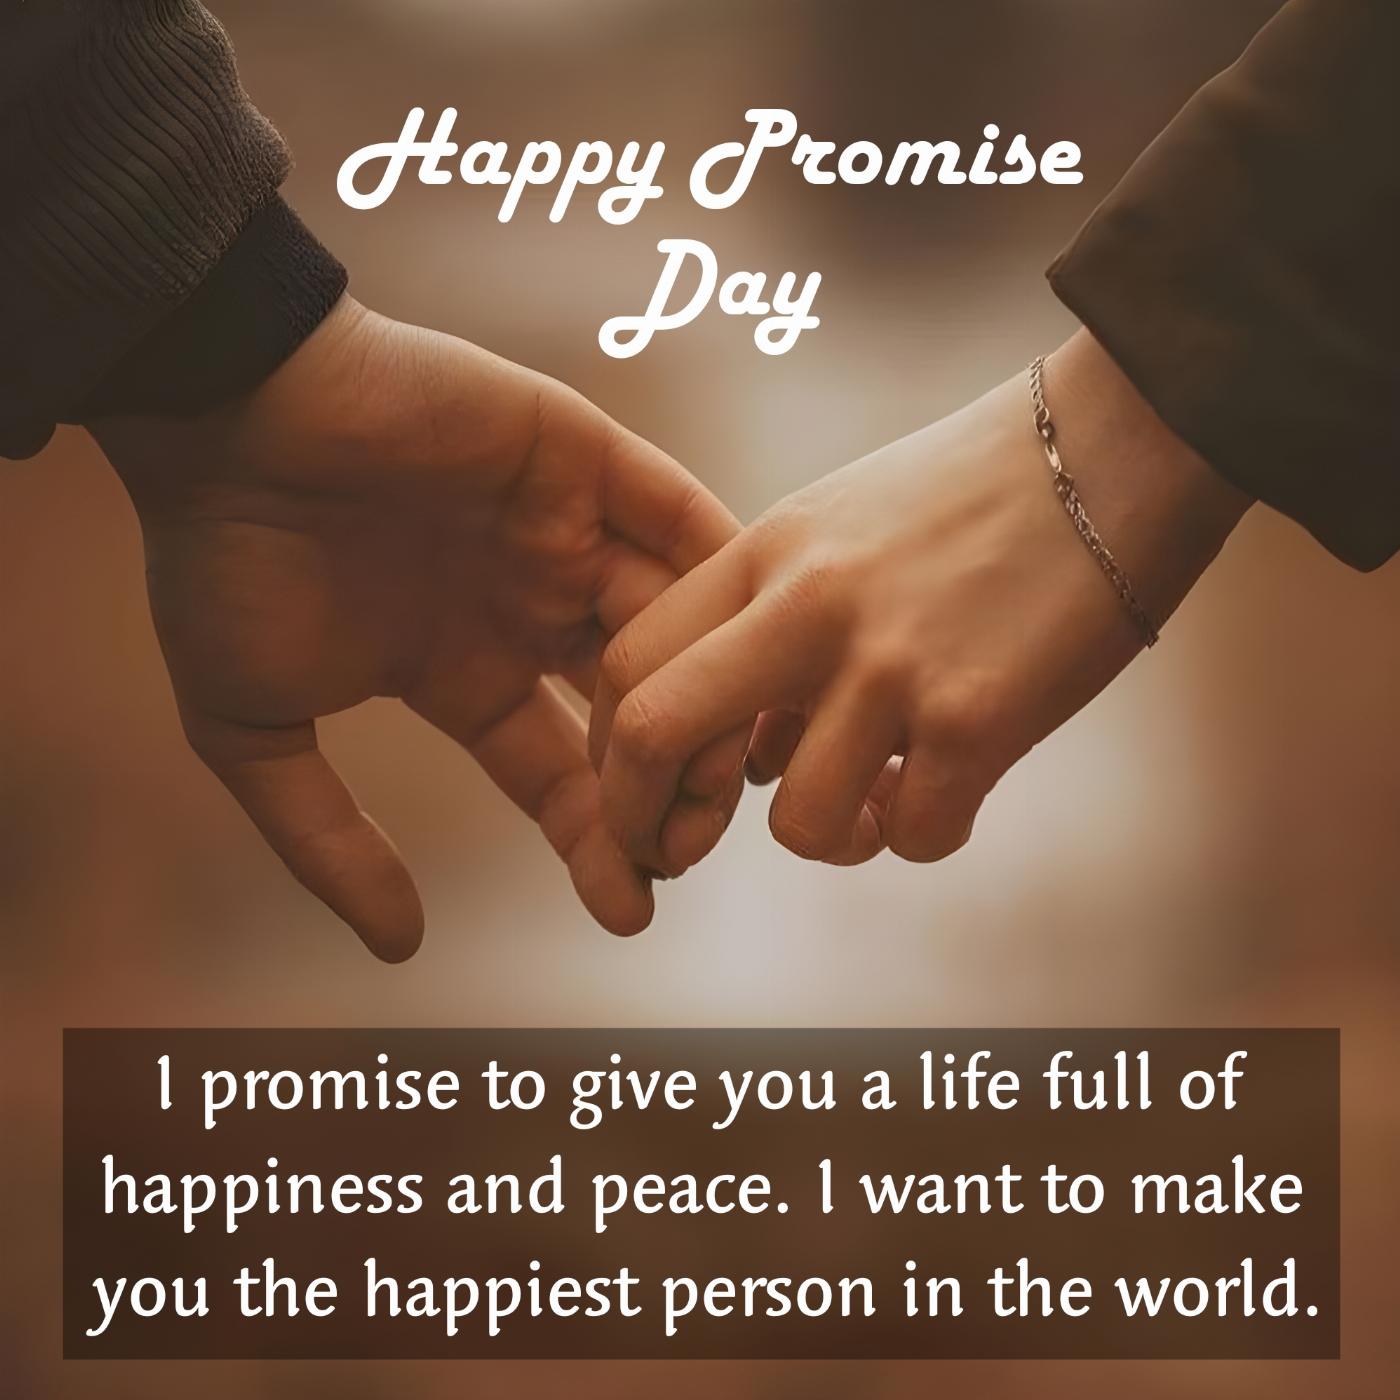 I promise to give you a life full of happiness and peace